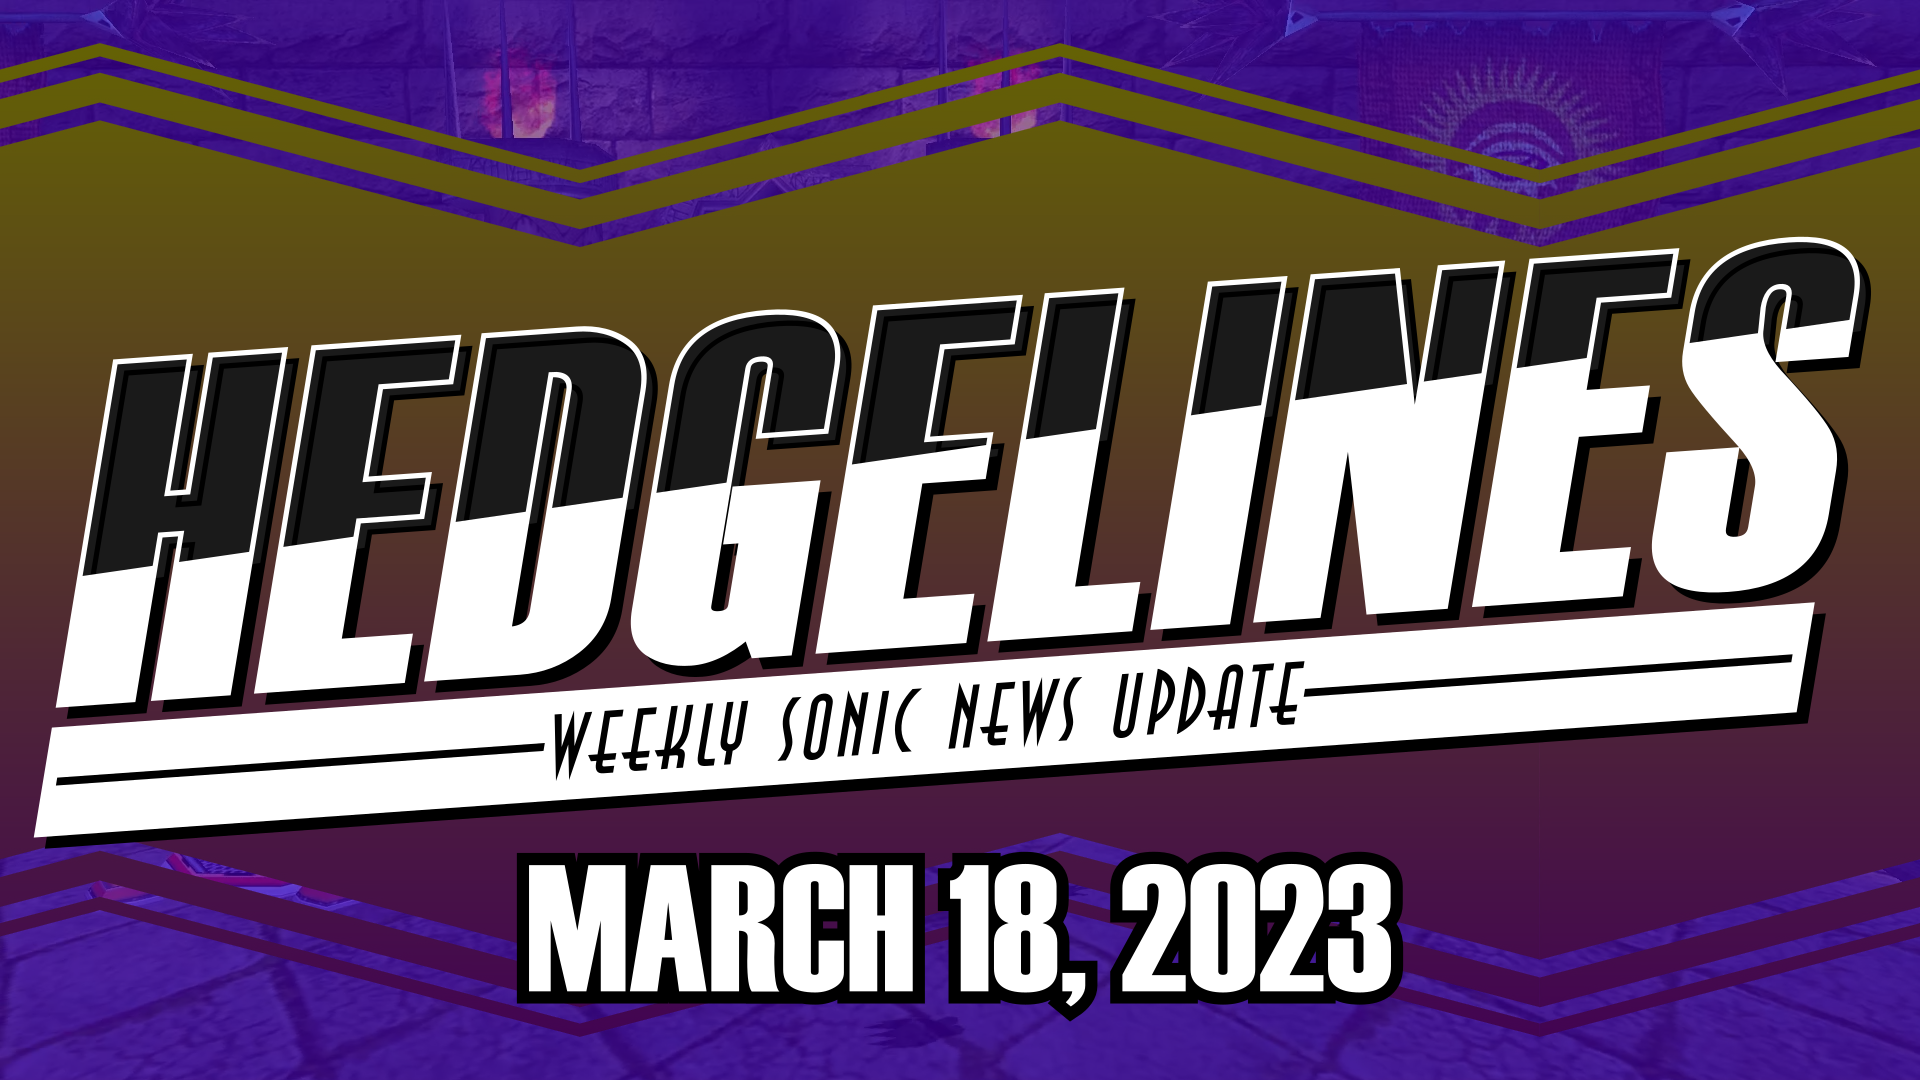 More information about "TailsTube Lore & Weird Toys - HedgeLines Mar. 11, 2023 - Sonic News Update"